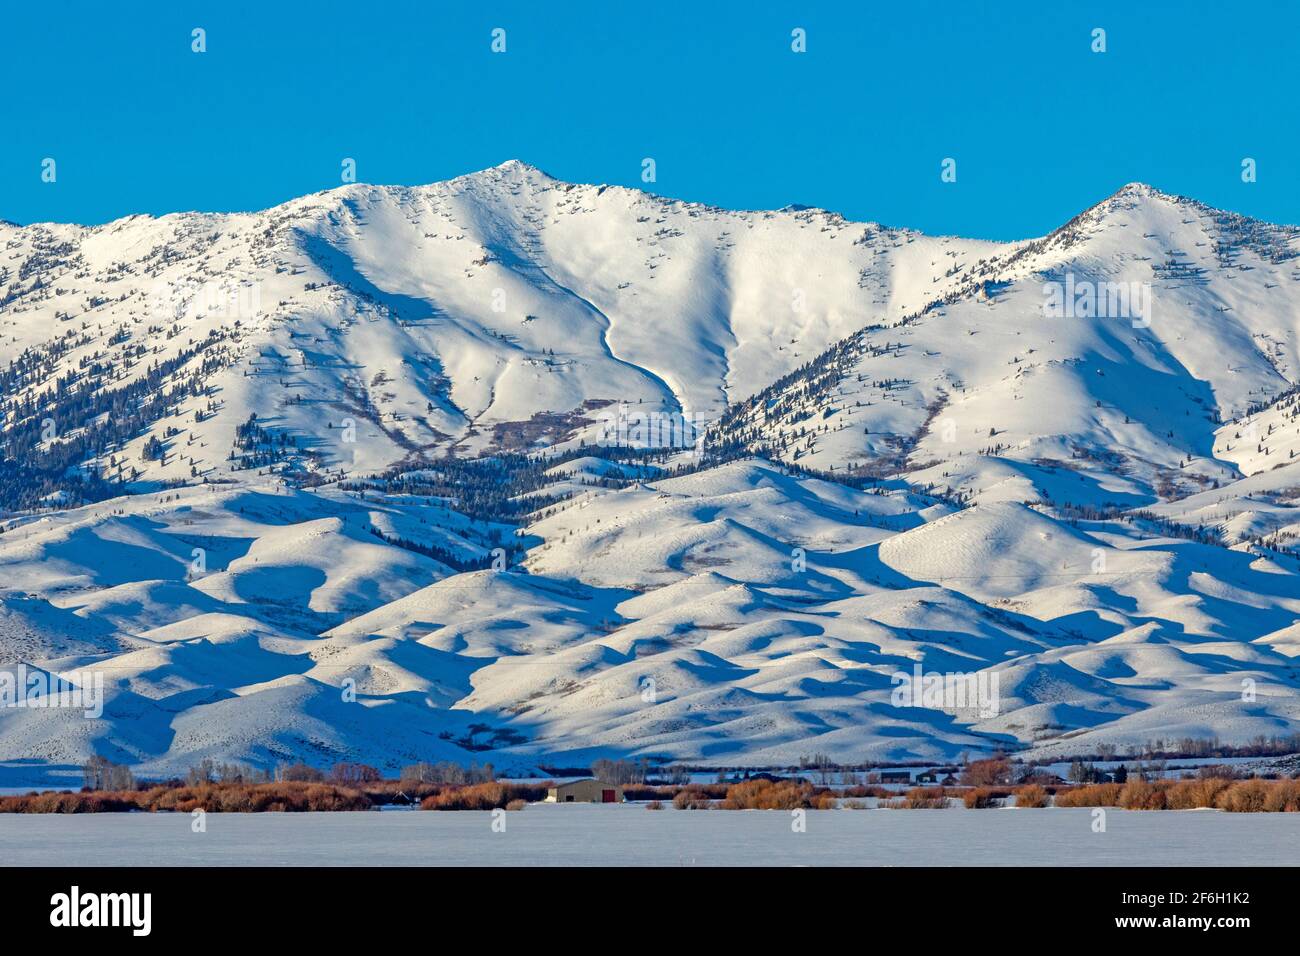 United States, Idaho, Fairfield, Scenic view of Soldier Mountain Stock Photo